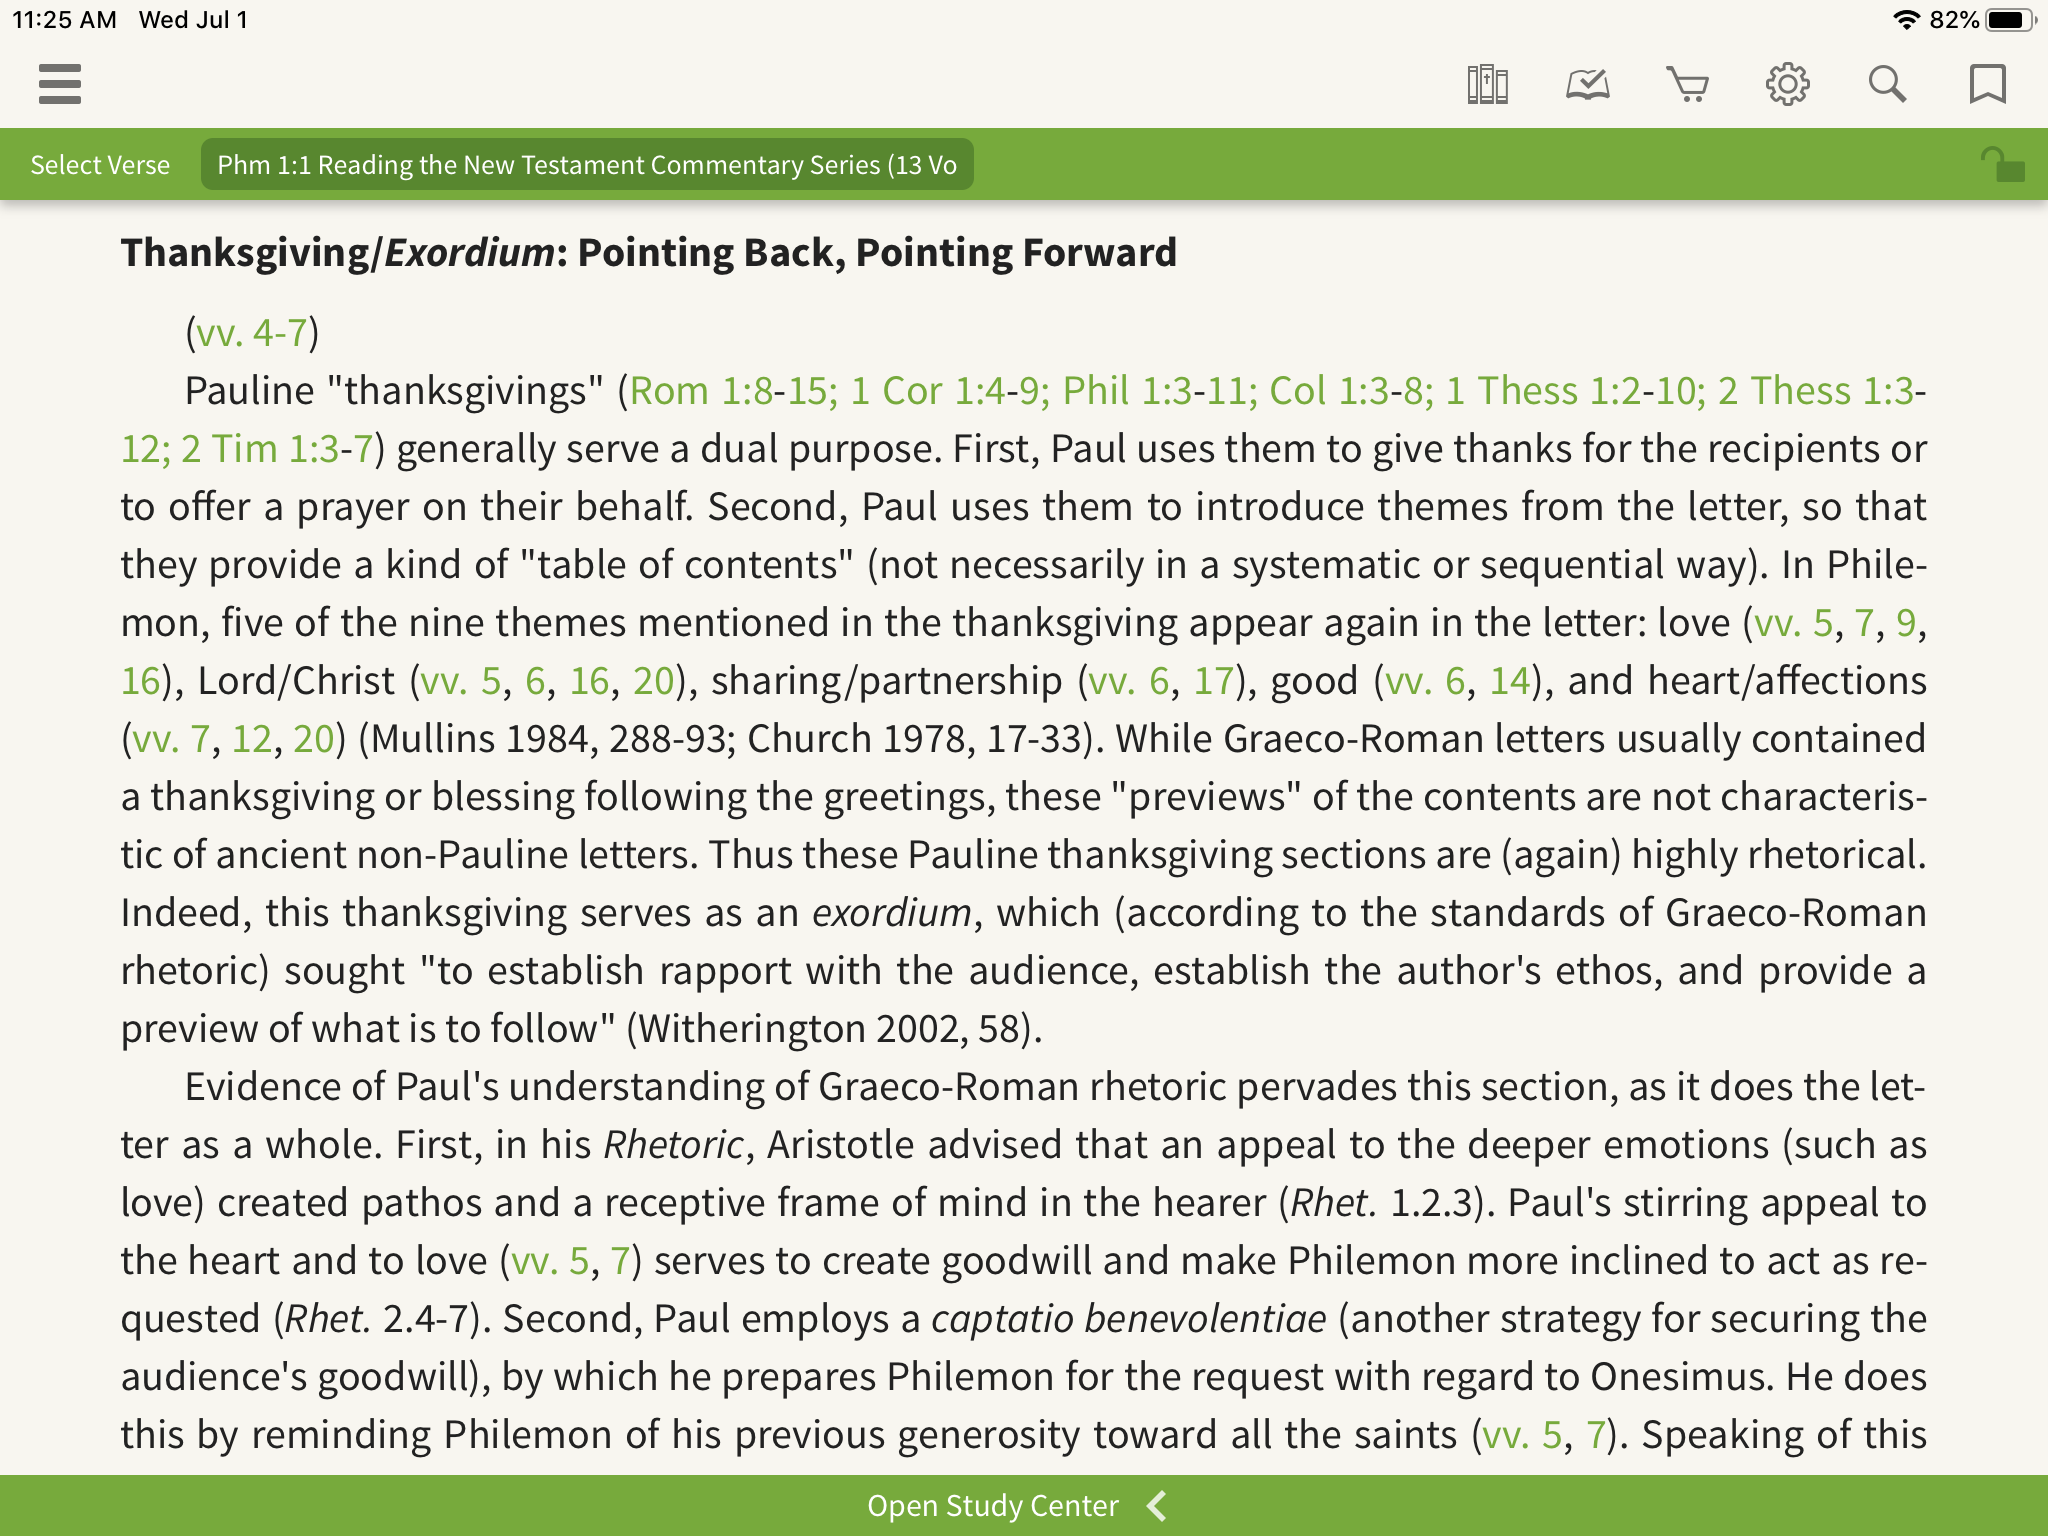 Reading the New Testament: Philemon in the Olive Tree Bible App commentary